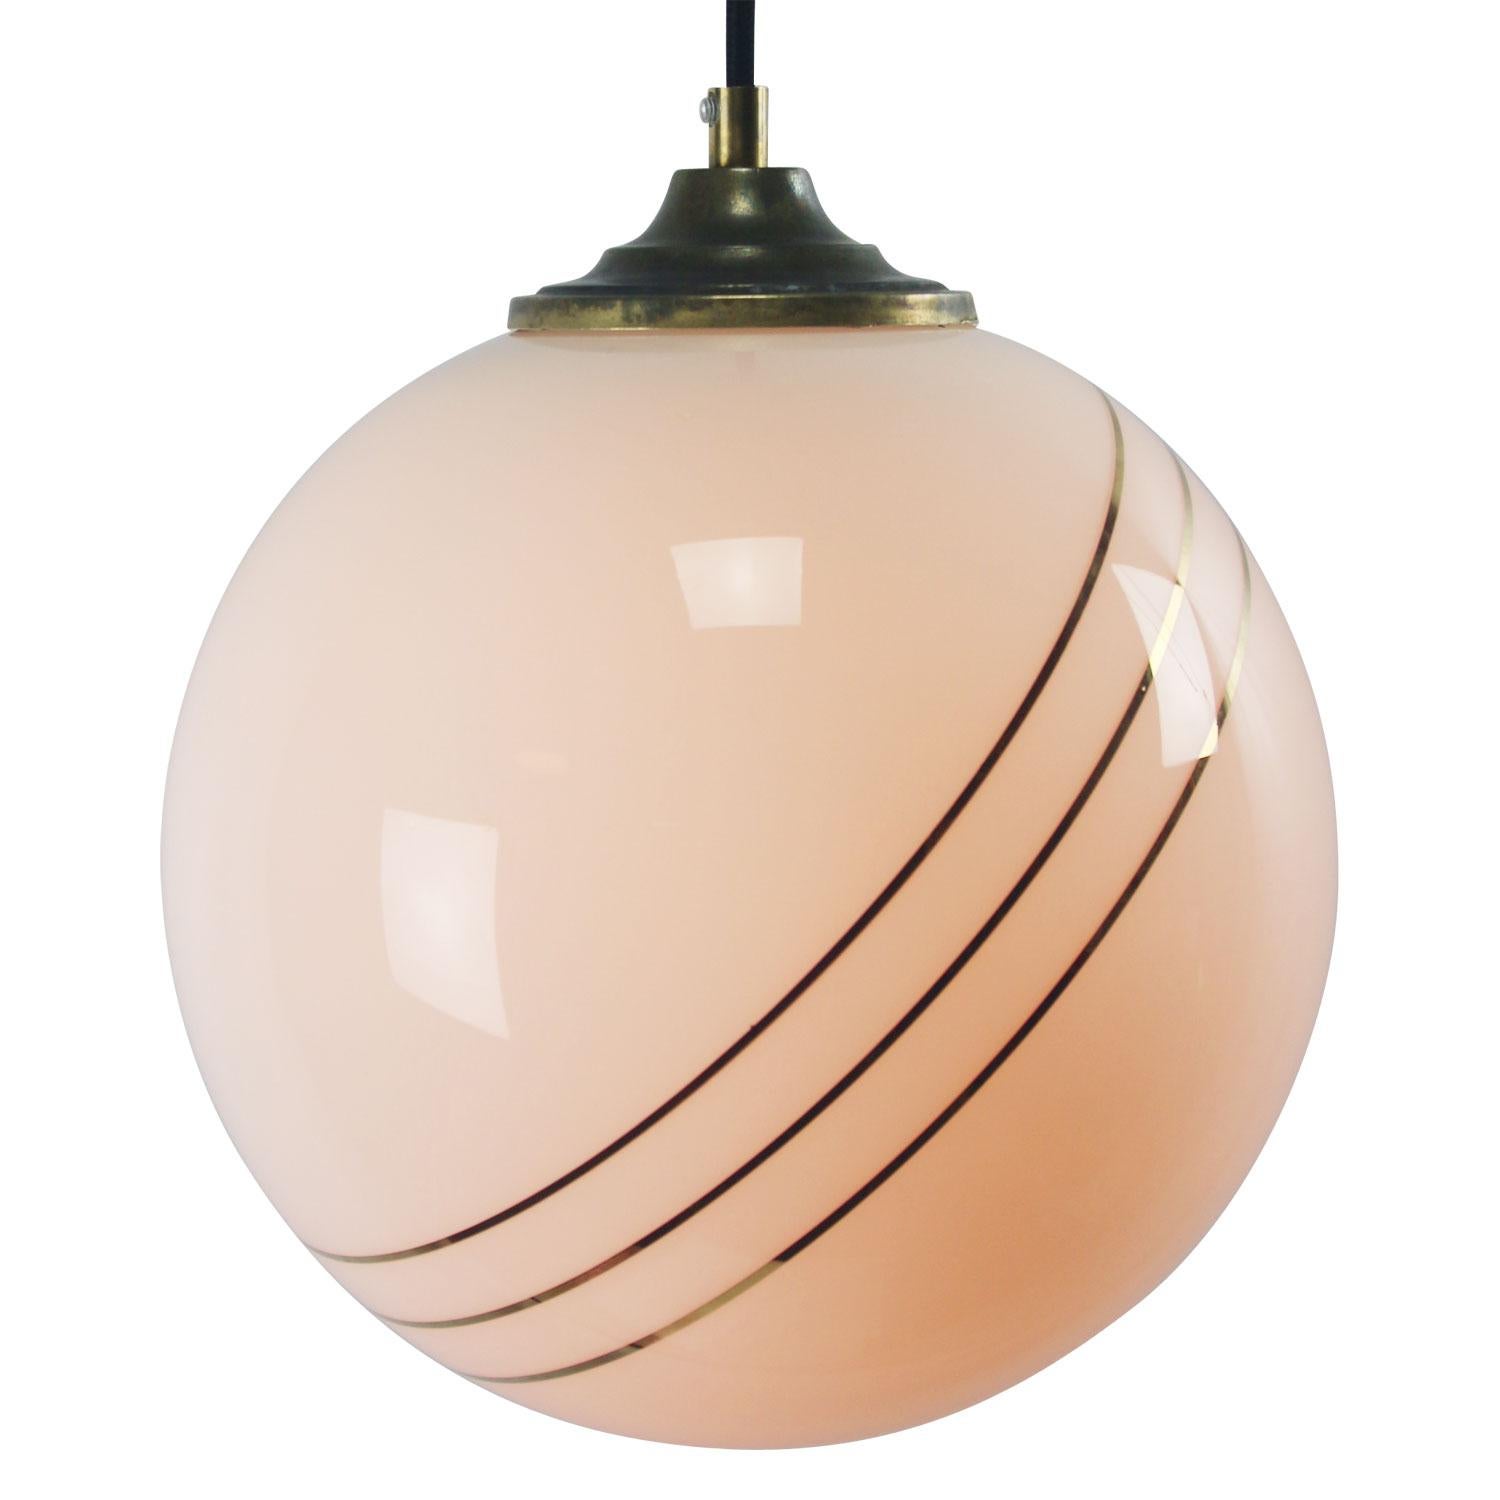 Opaline glass, 3 gold stripes globe glass pendant.

Weight: 2.00 kg / 4.4 lb

Priced per individual item. All lamps have been made suitable by international standards for incandescent light bulbs, energy-efficient and LED bulbs. E26/E27 bulb